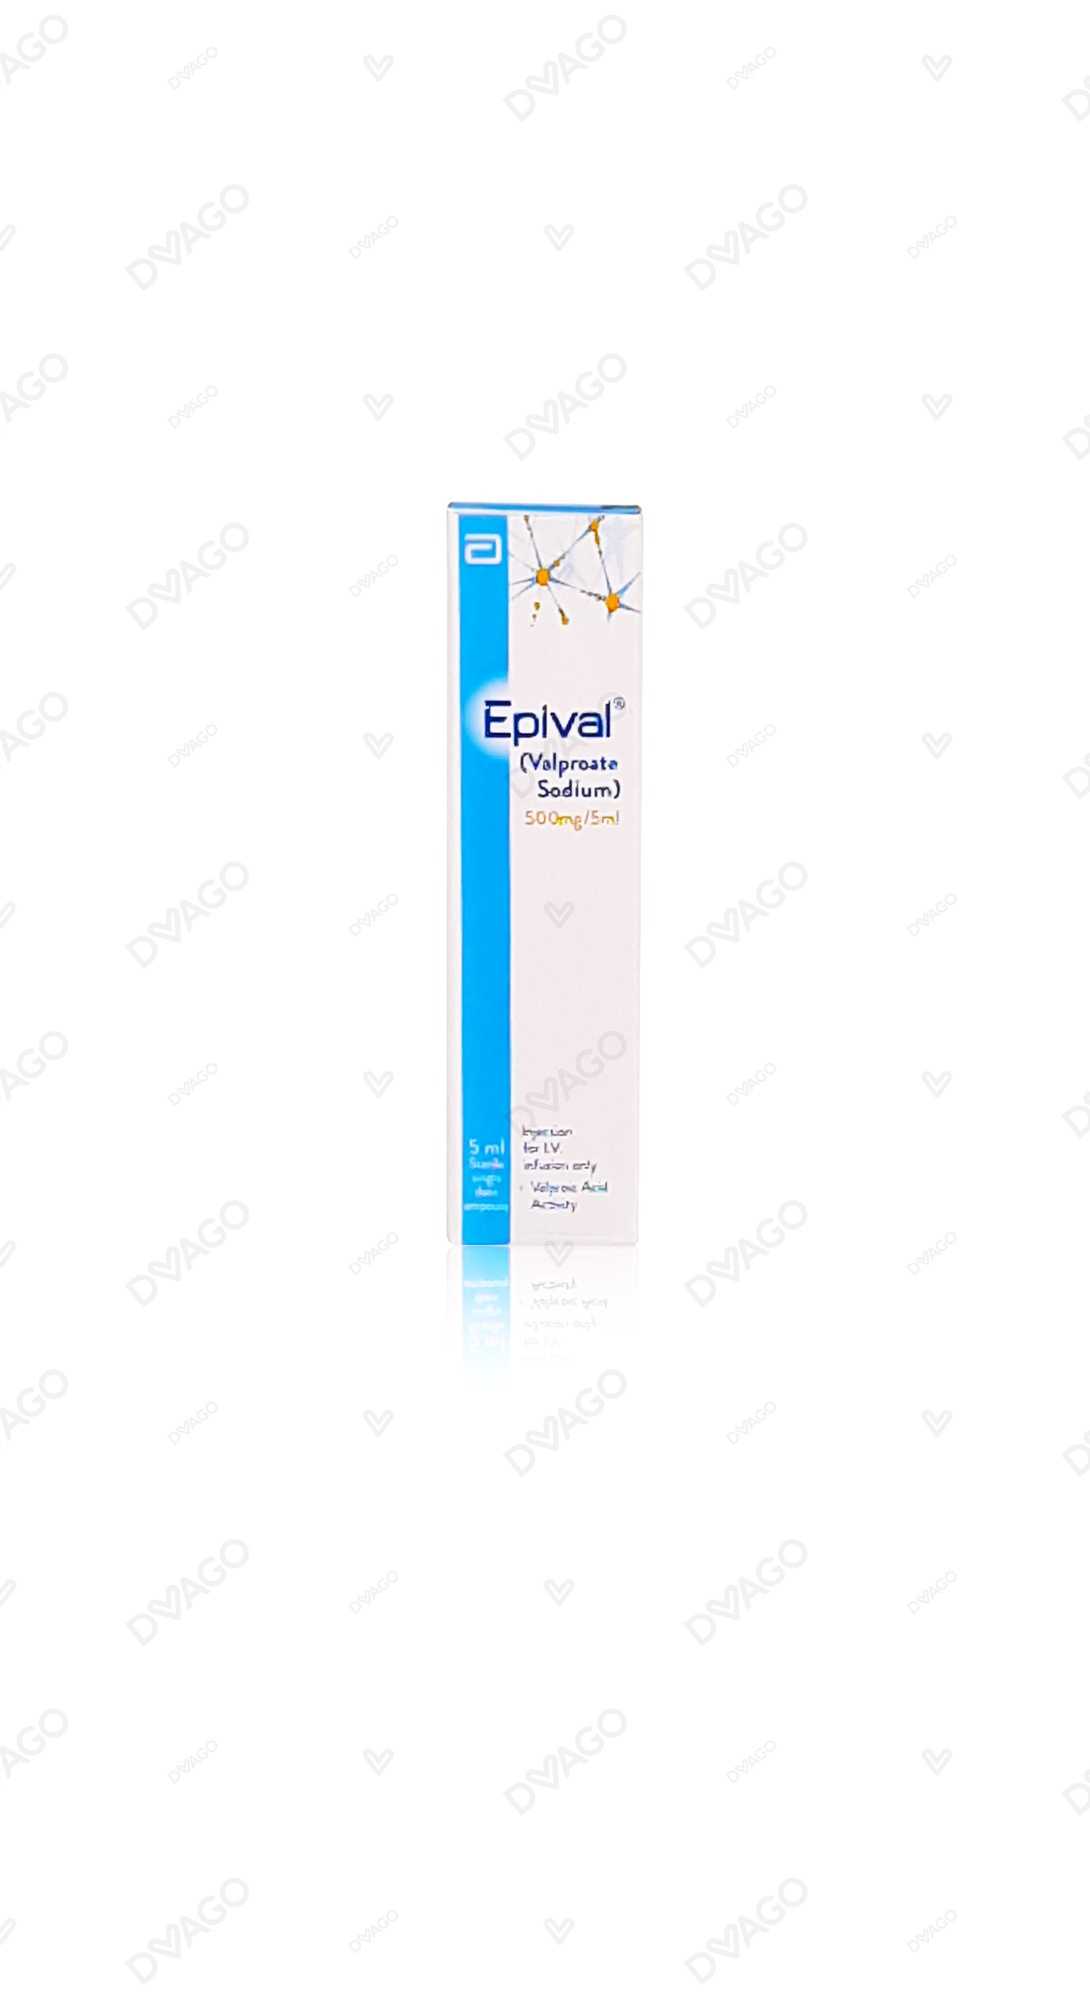 epival iv injection 500mg/5ml